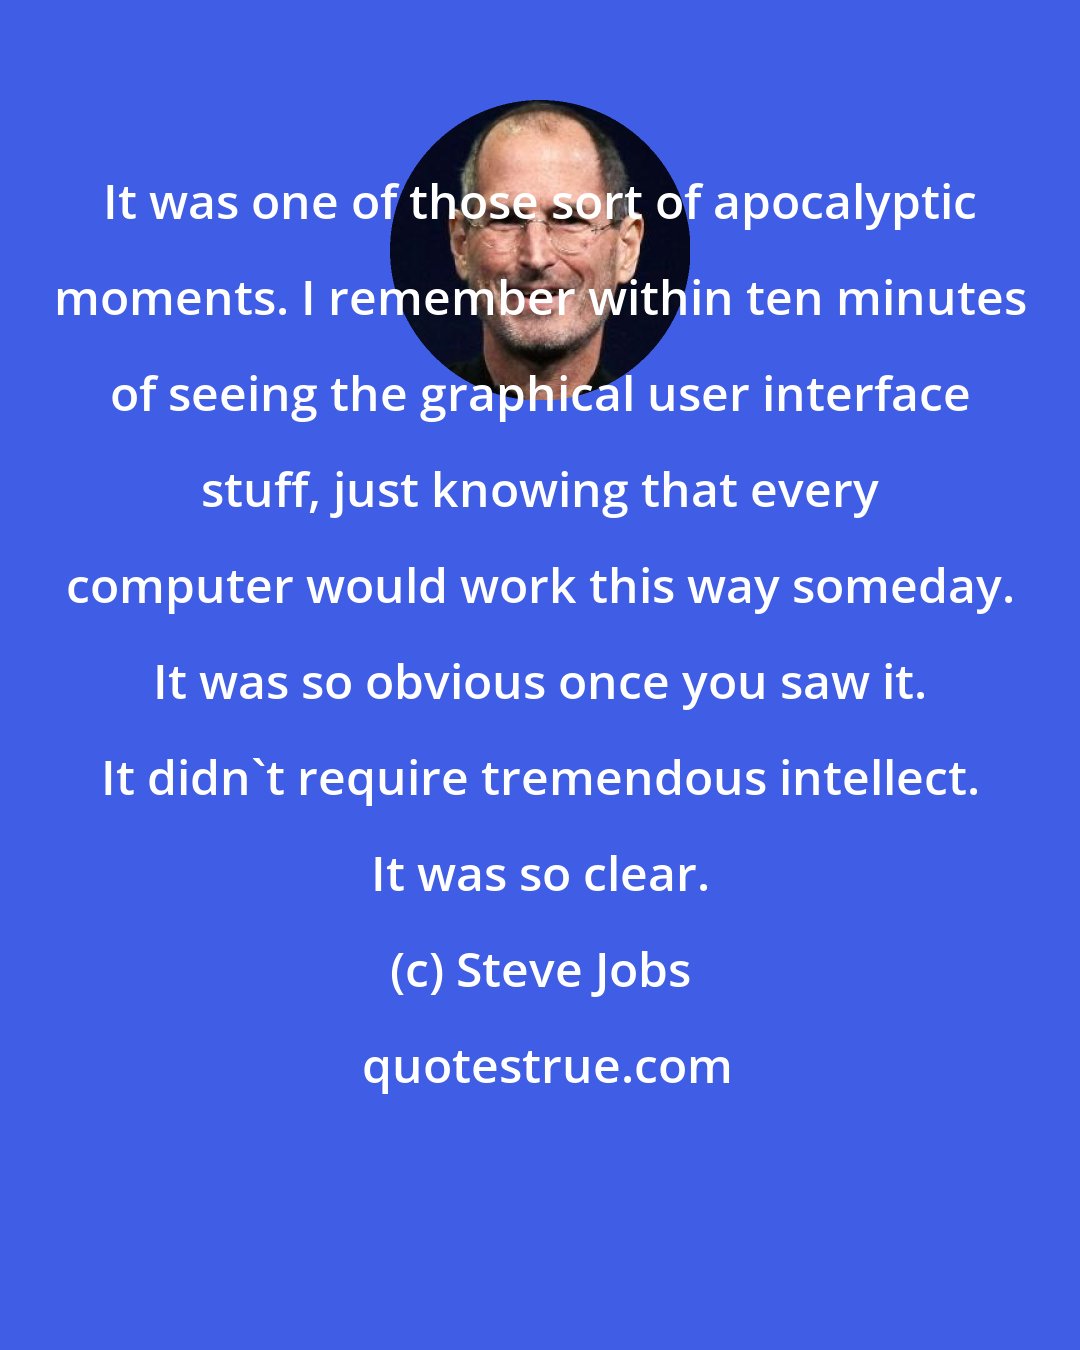 Steve Jobs: It was one of those sort of apocalyptic moments. I remember within ten minutes of seeing the graphical user interface stuff, just knowing that every computer would work this way someday. It was so obvious once you saw it. It didn't require tremendous intellect. It was so clear.